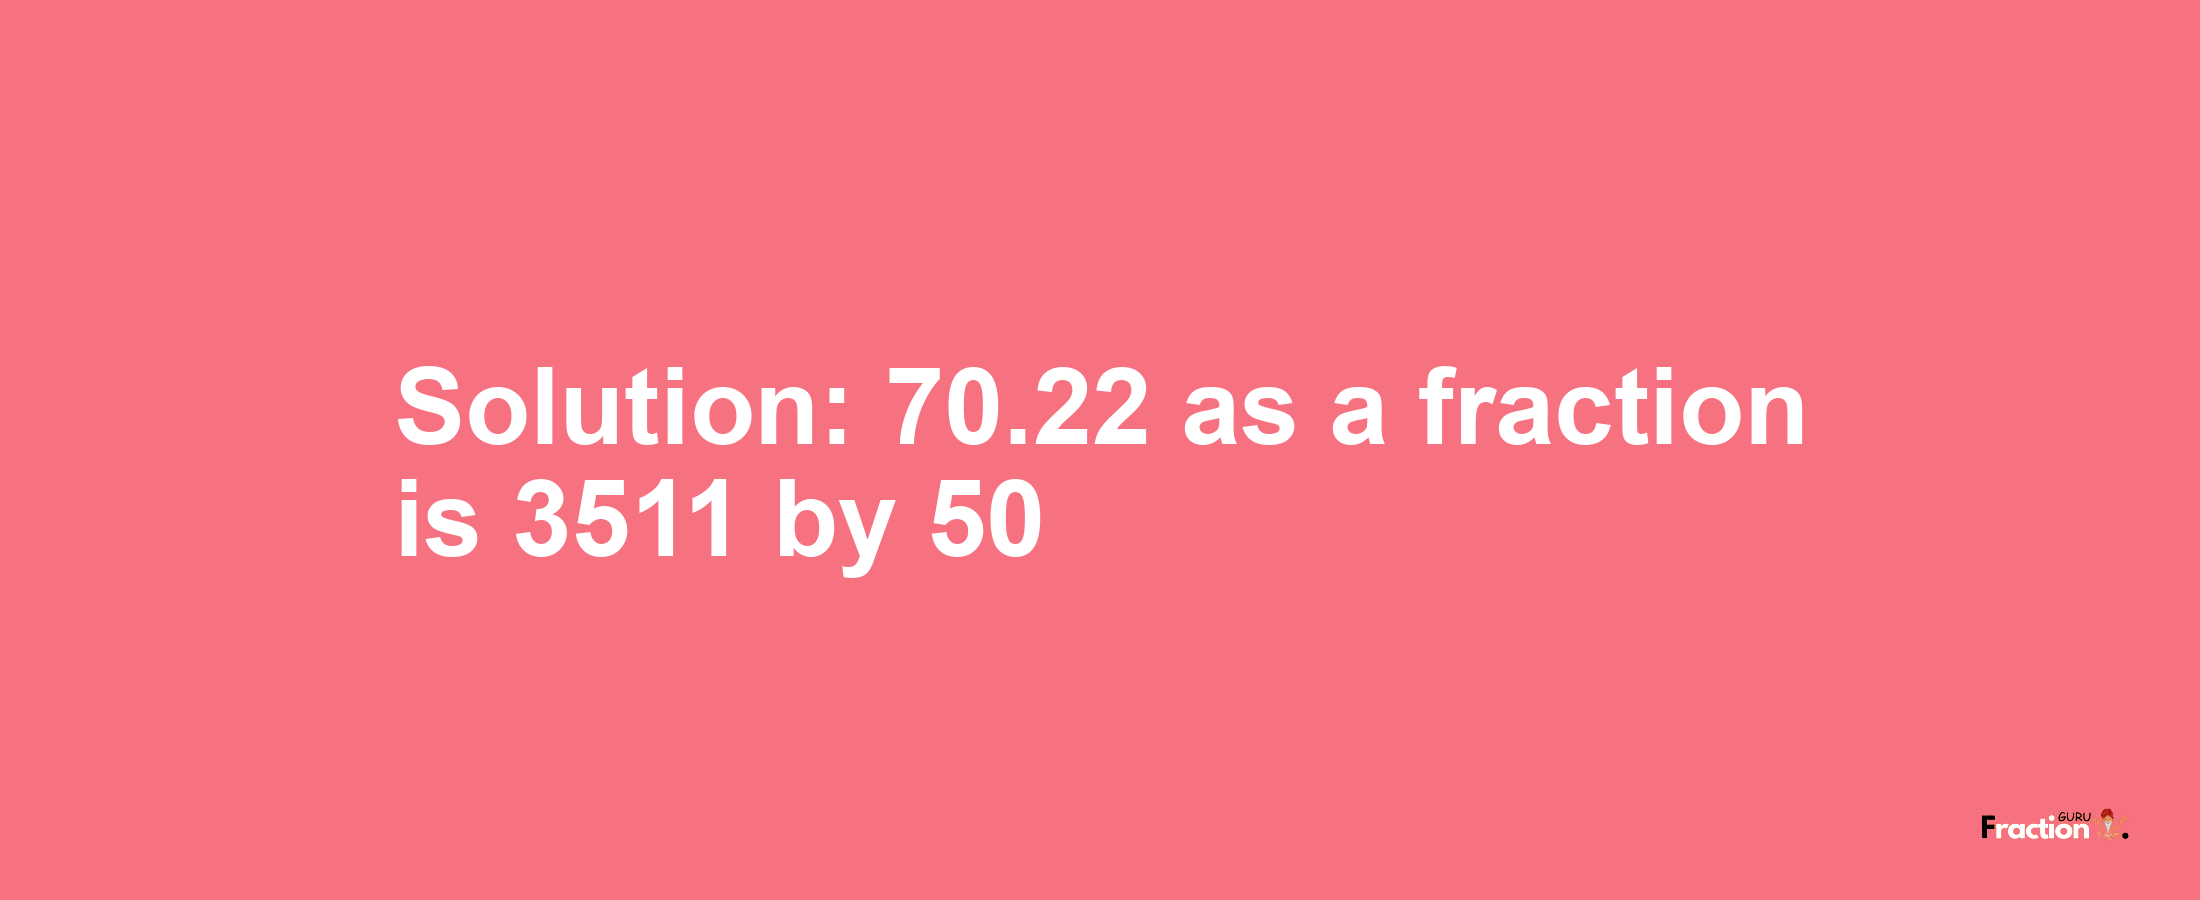 Solution:70.22 as a fraction is 3511/50